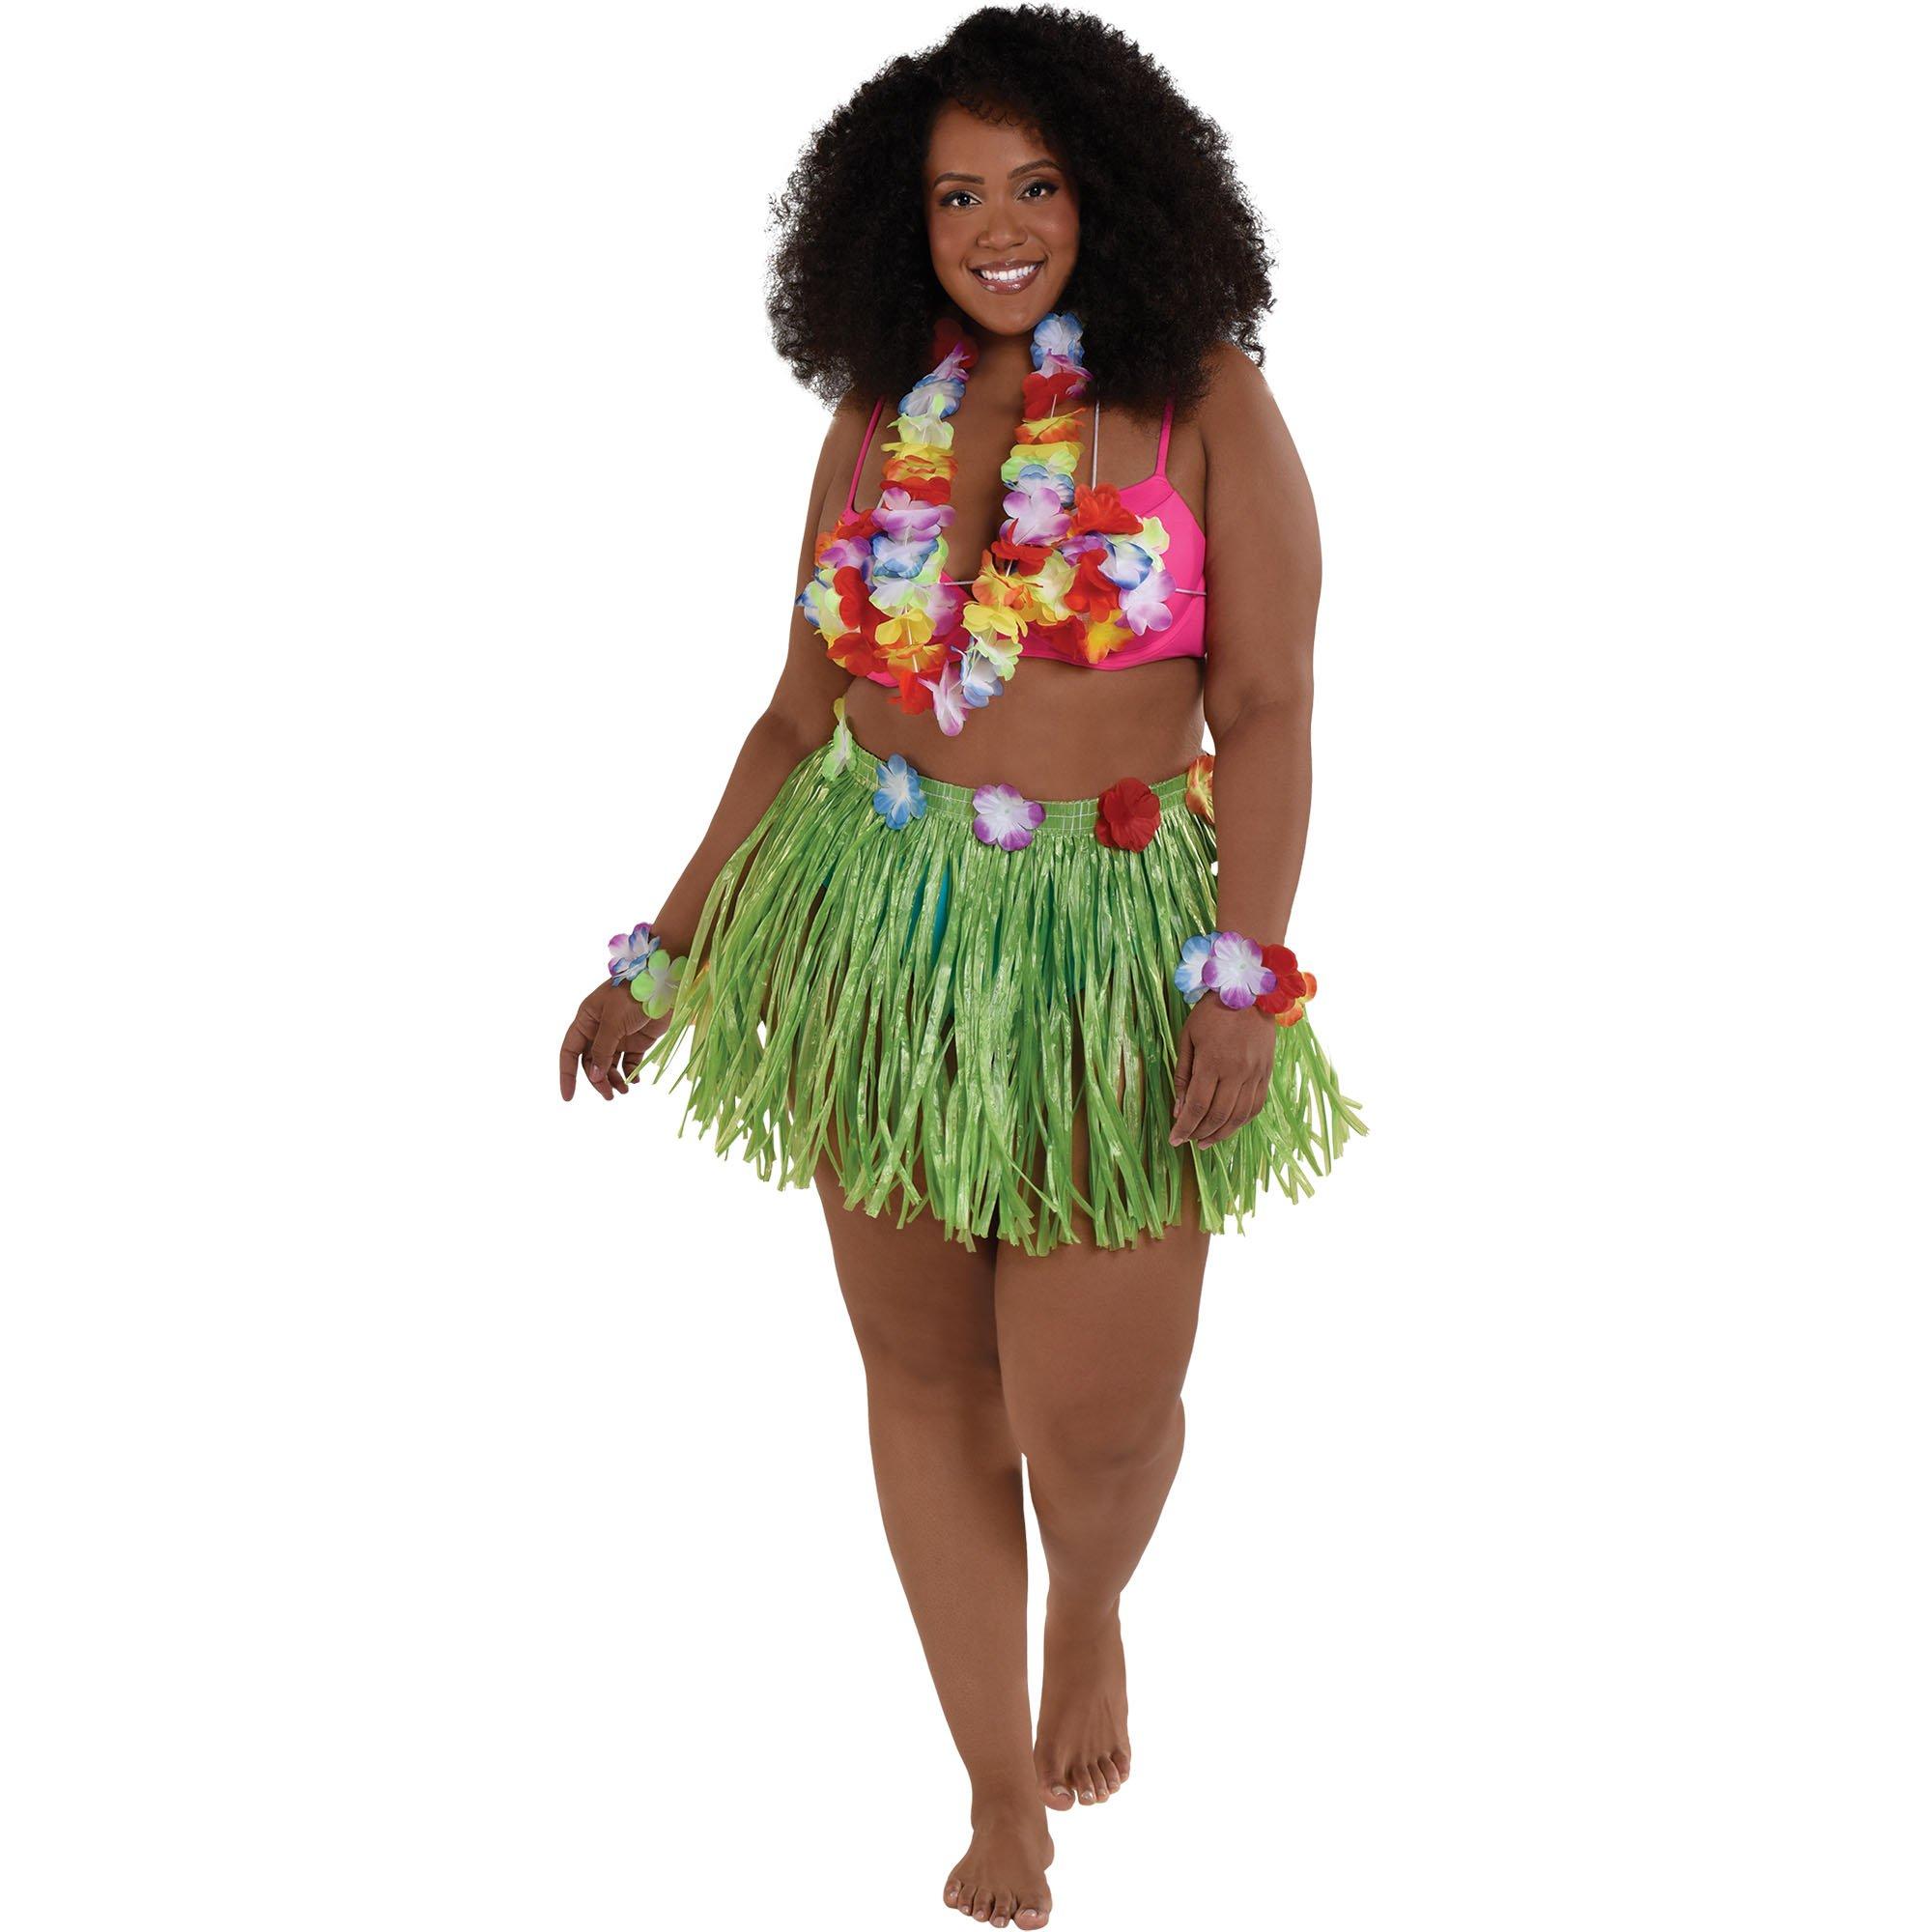 Make It Up Costumes Grass Hula Skirt - Deluxe